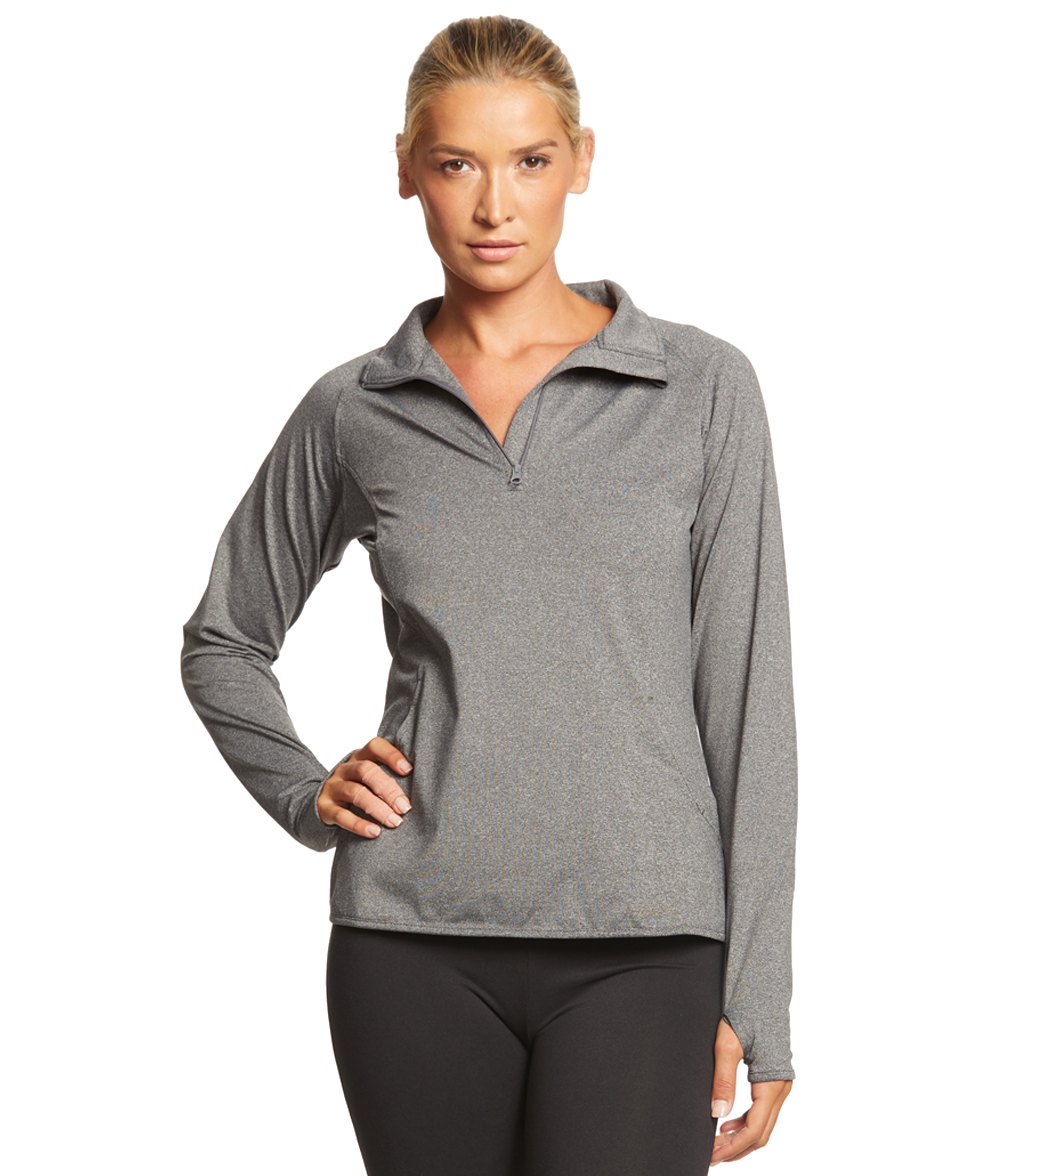 Women's Sport-Tek Sport-Wick Stretch 1/2-Zip Pullover - Charcoal Grey Heather Large Polyester/Spandex - Swimoutlet.com